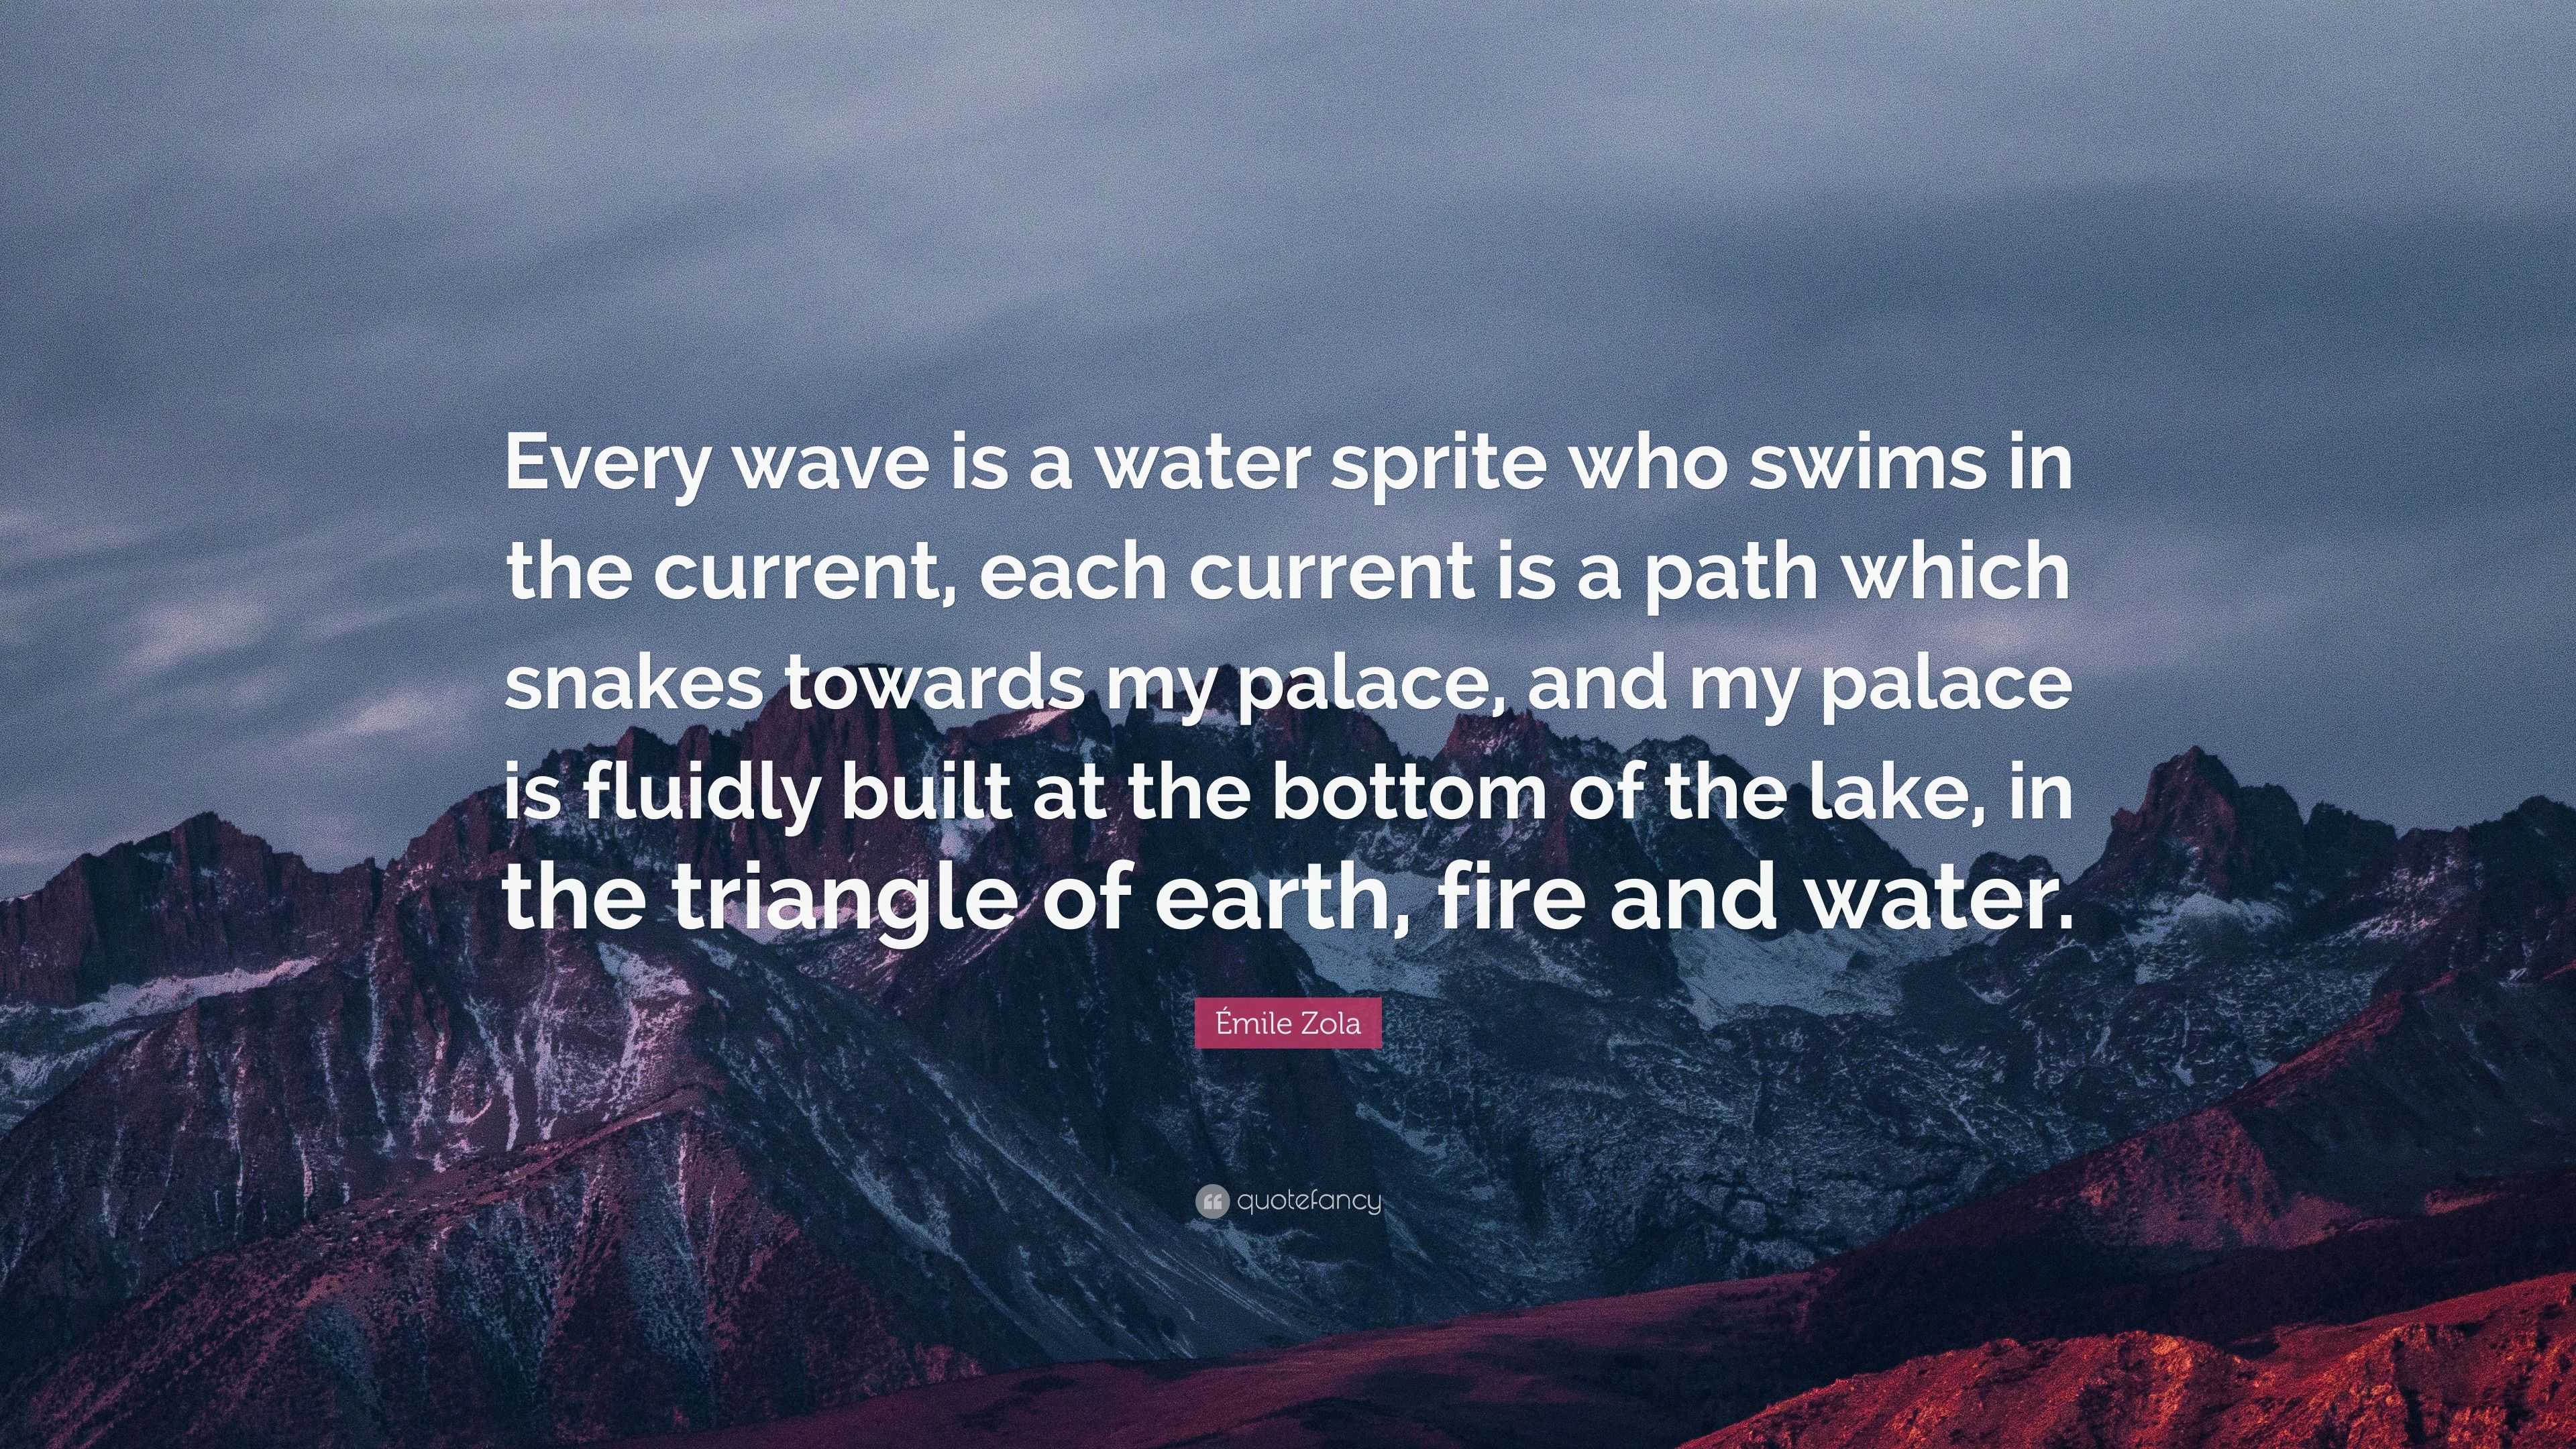 Émile Zola Quote: “Every wave is a water sprite who swims in the ...